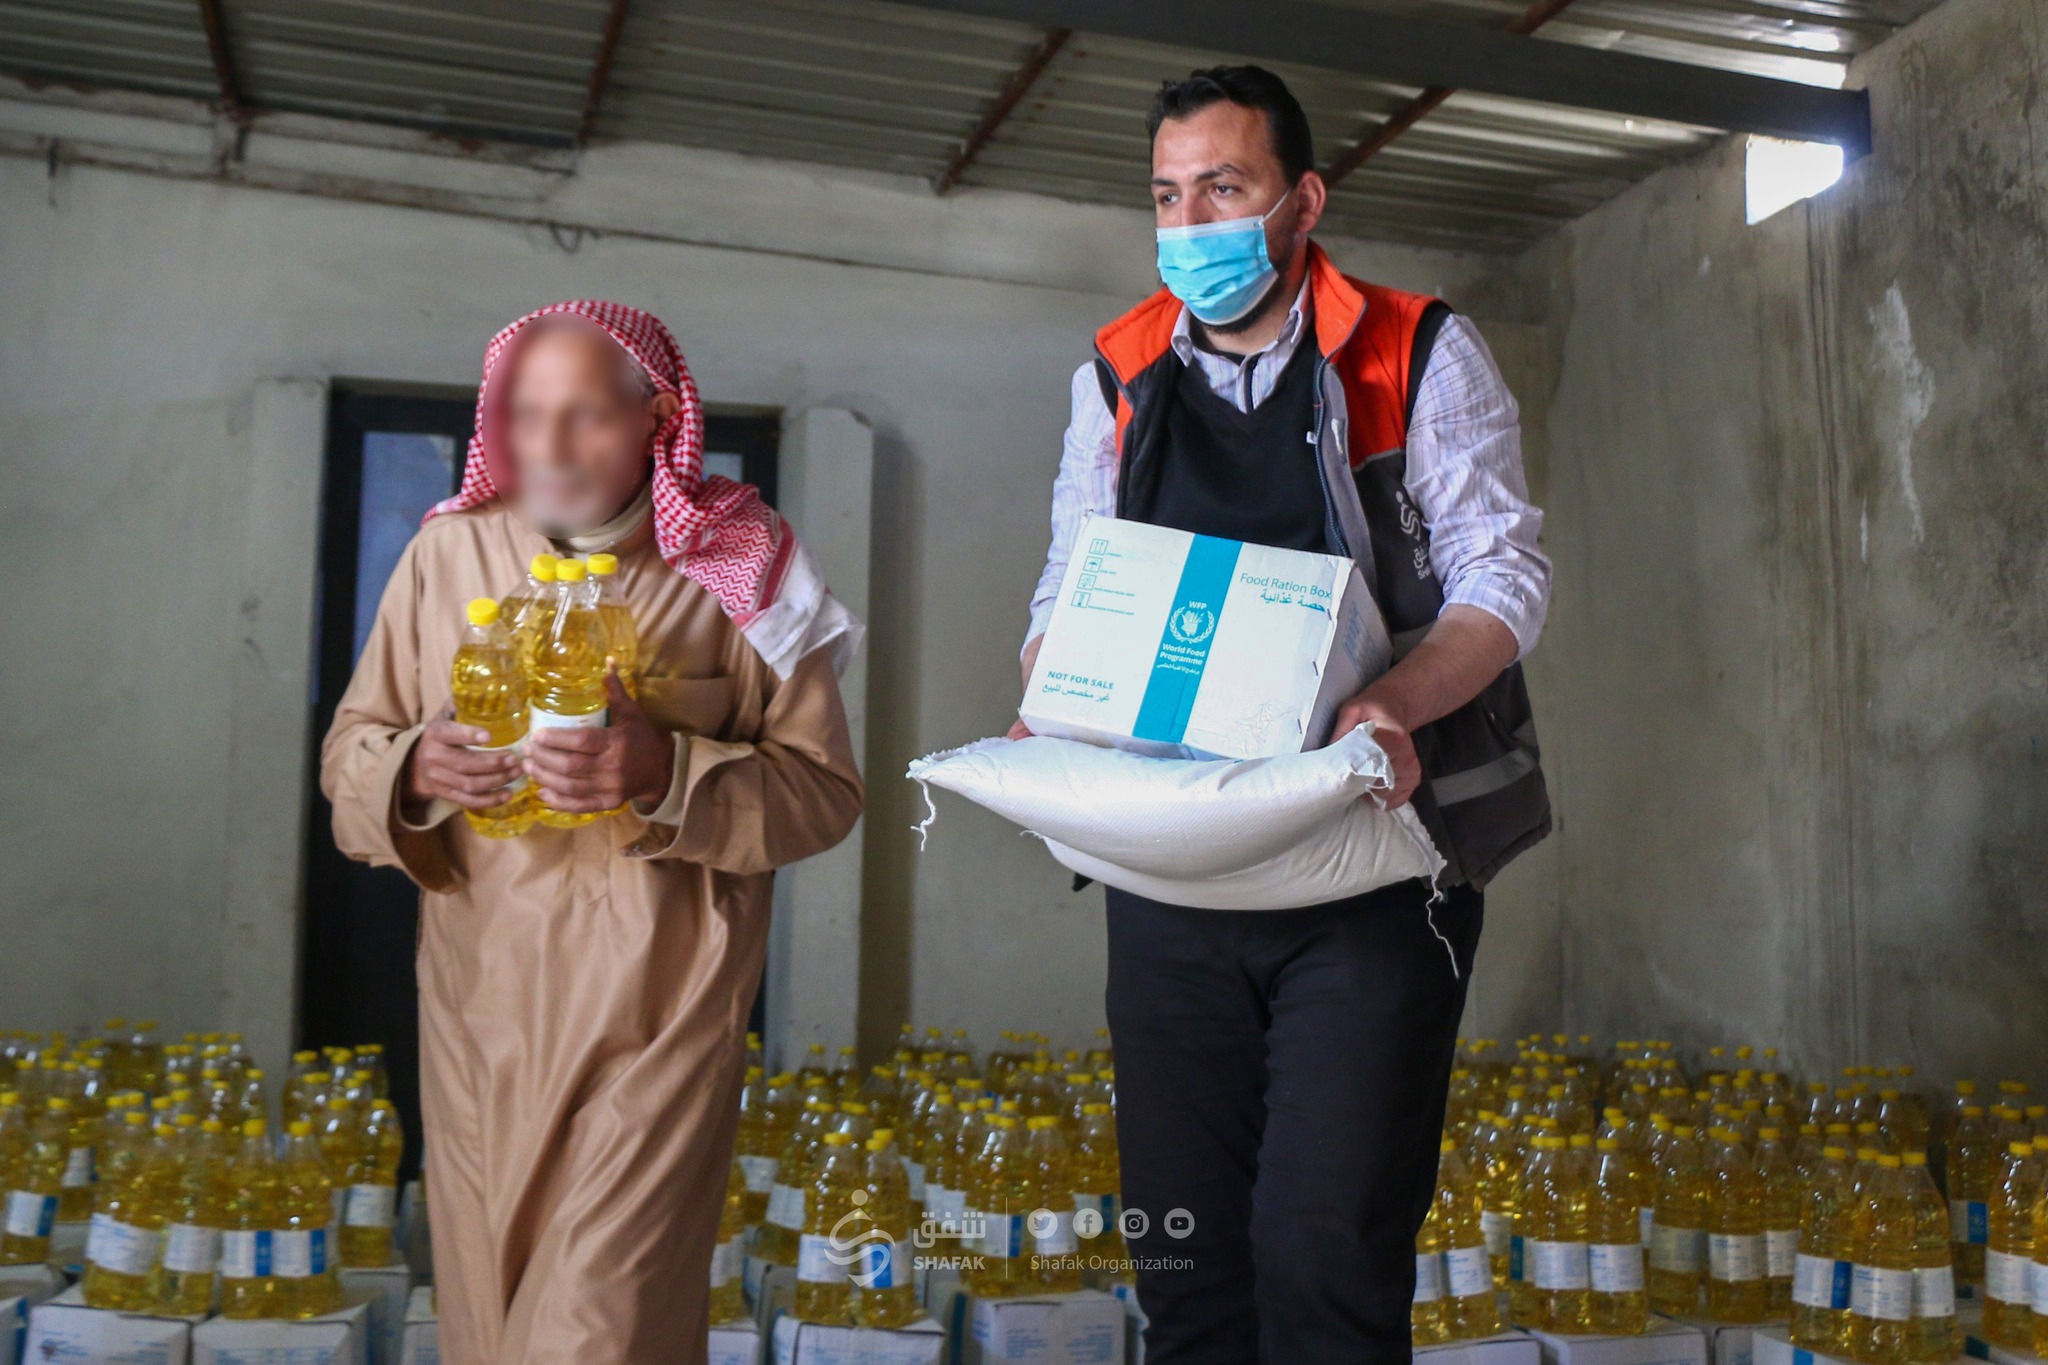 Distribution of food baskets from the World Food Programme through the Shafak organization in northern Syria - June 19, 2023 (Shafak)